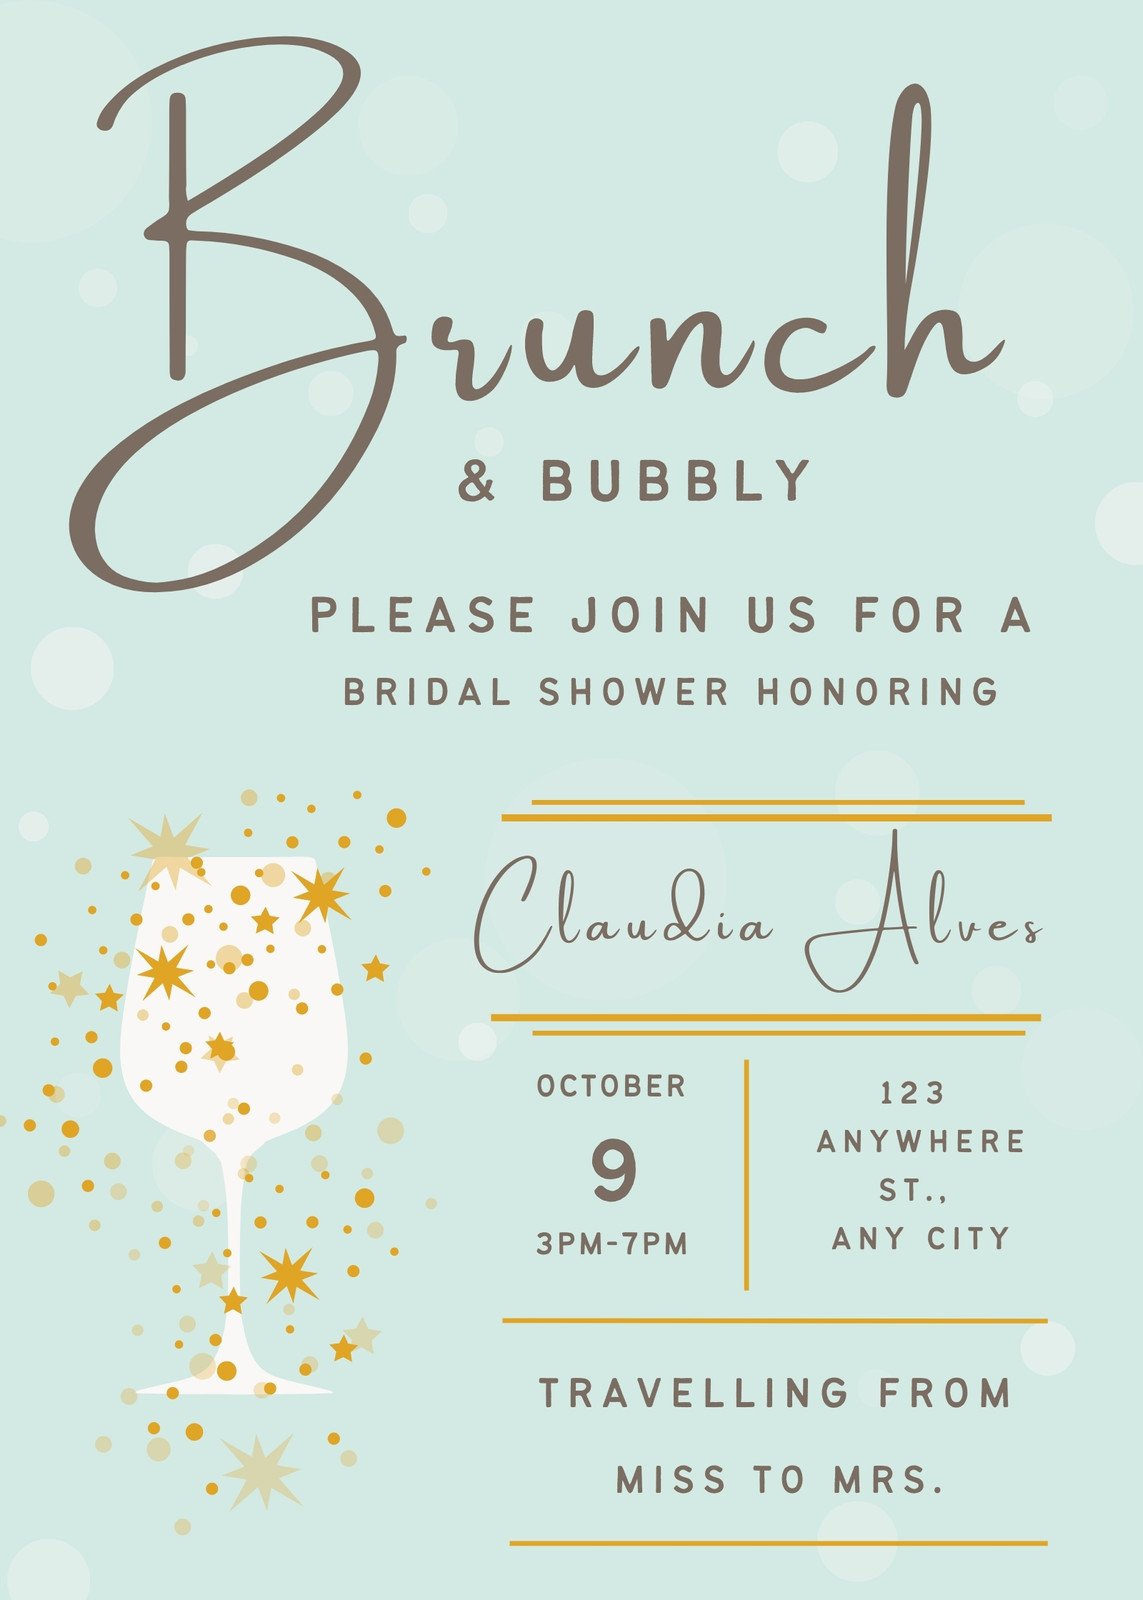 Lunch Invitation Examples - 34+ Templates, and Design Ideas - PSD, AI, Word  | Examples